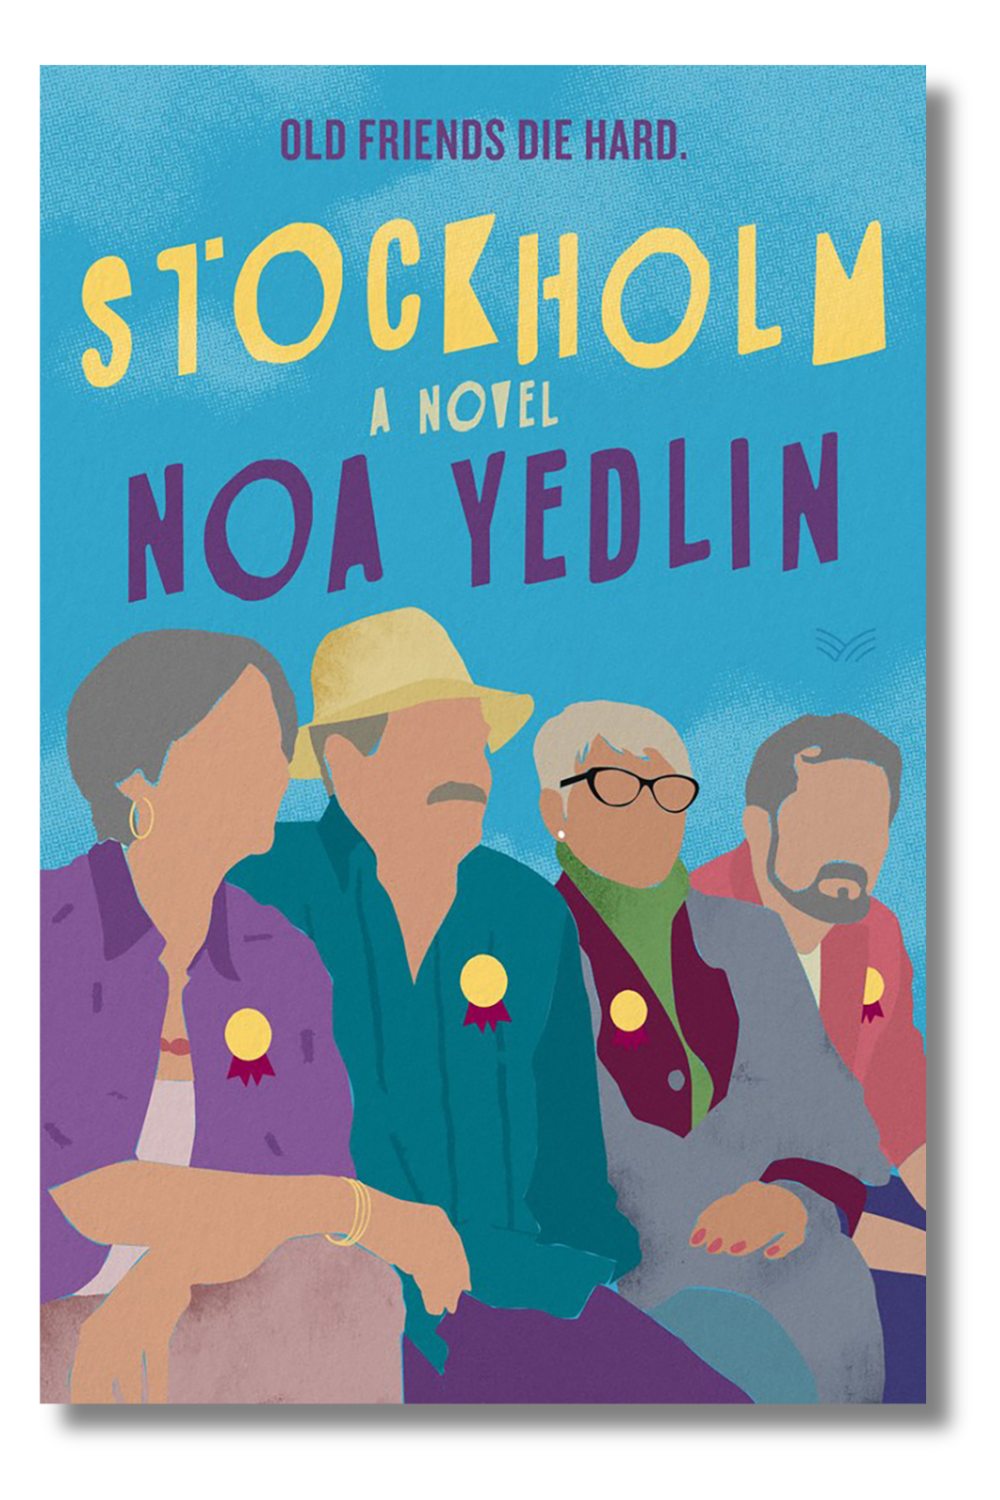 The cover of "Stockholm" by Noa Yedlin, tr. by Jessica Cohen